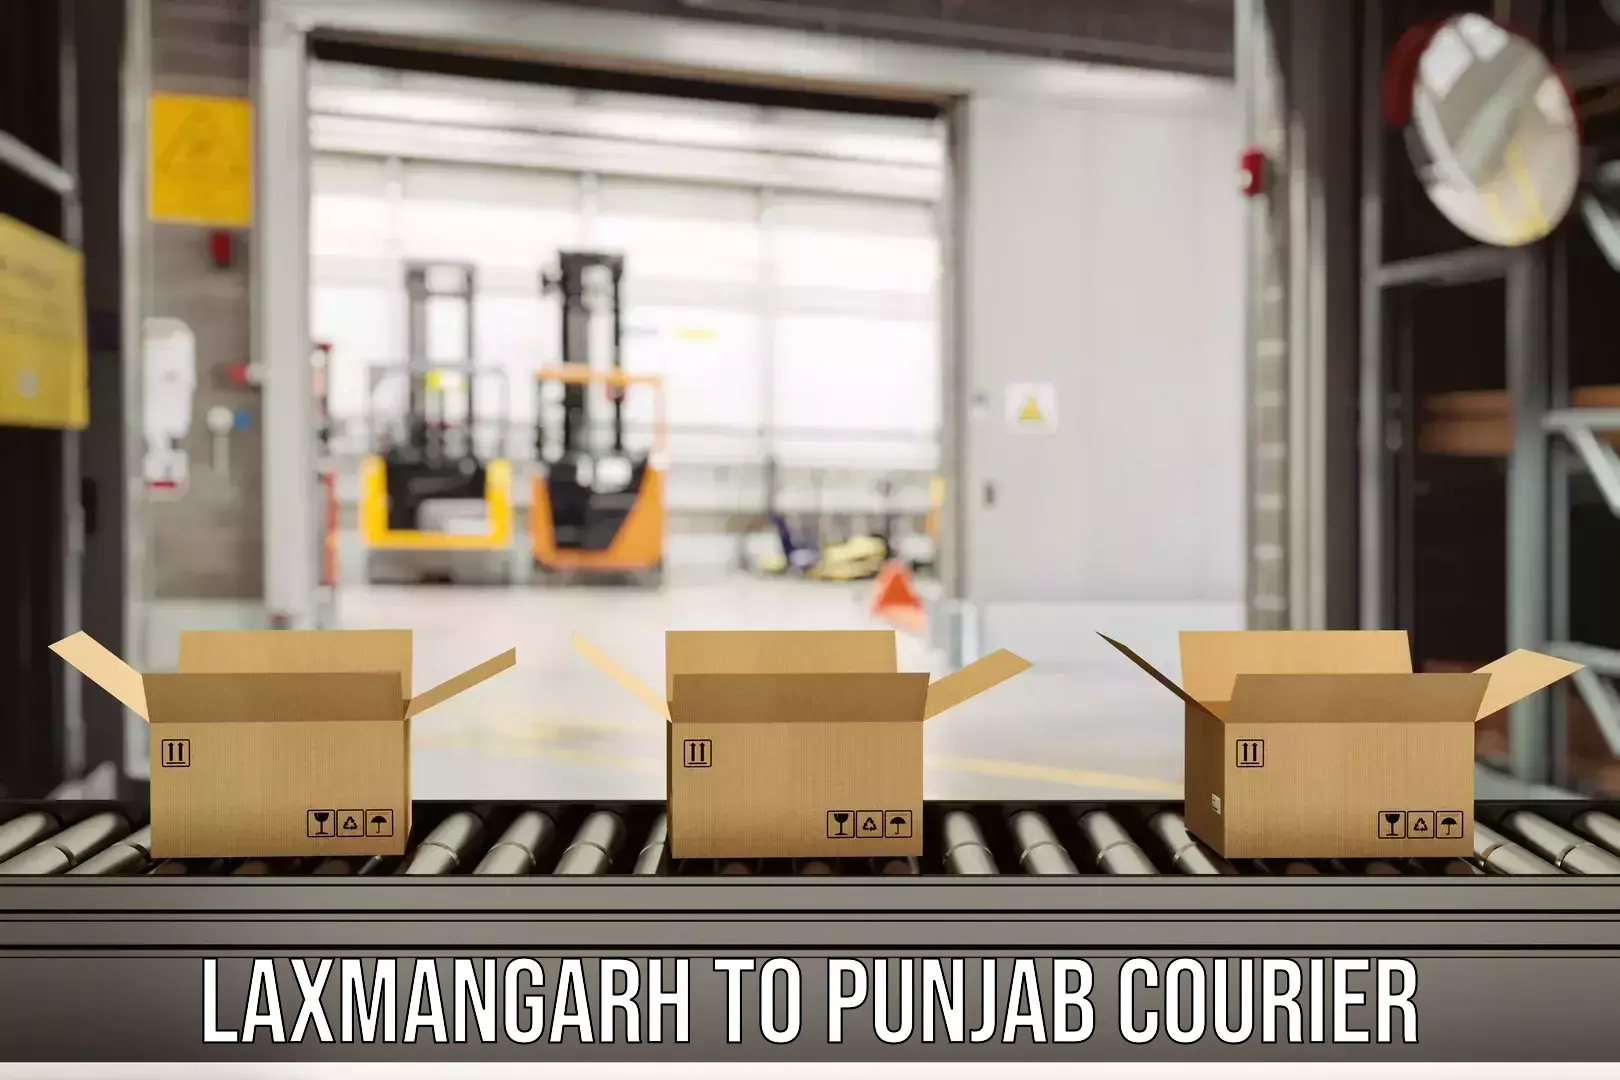 Express delivery capabilities Laxmangarh to Sangrur